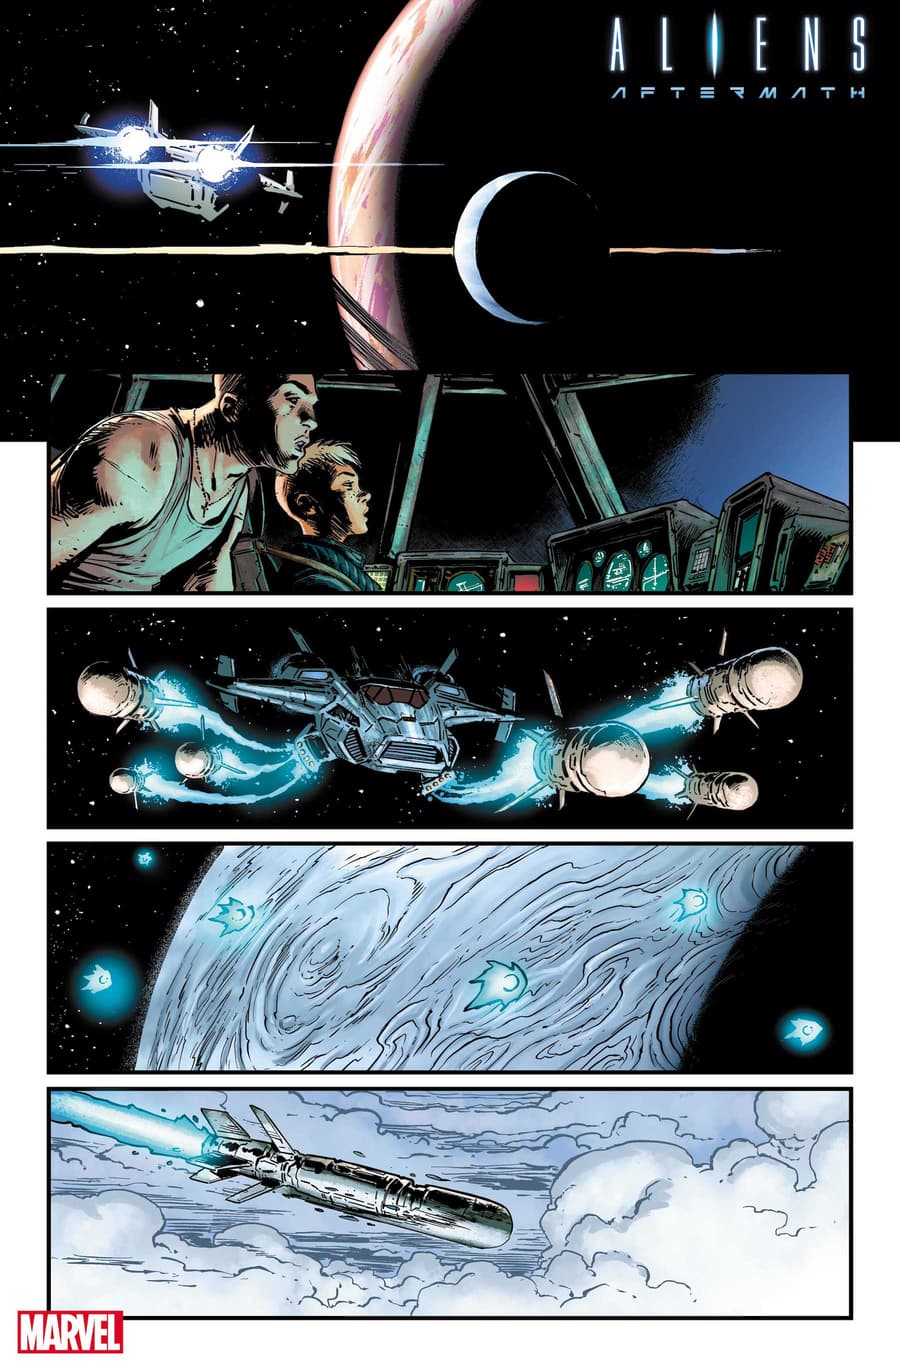 ALIENS: AFTERMATH #1 preview art by Dave Wachter with colors by Chris Sotomayor